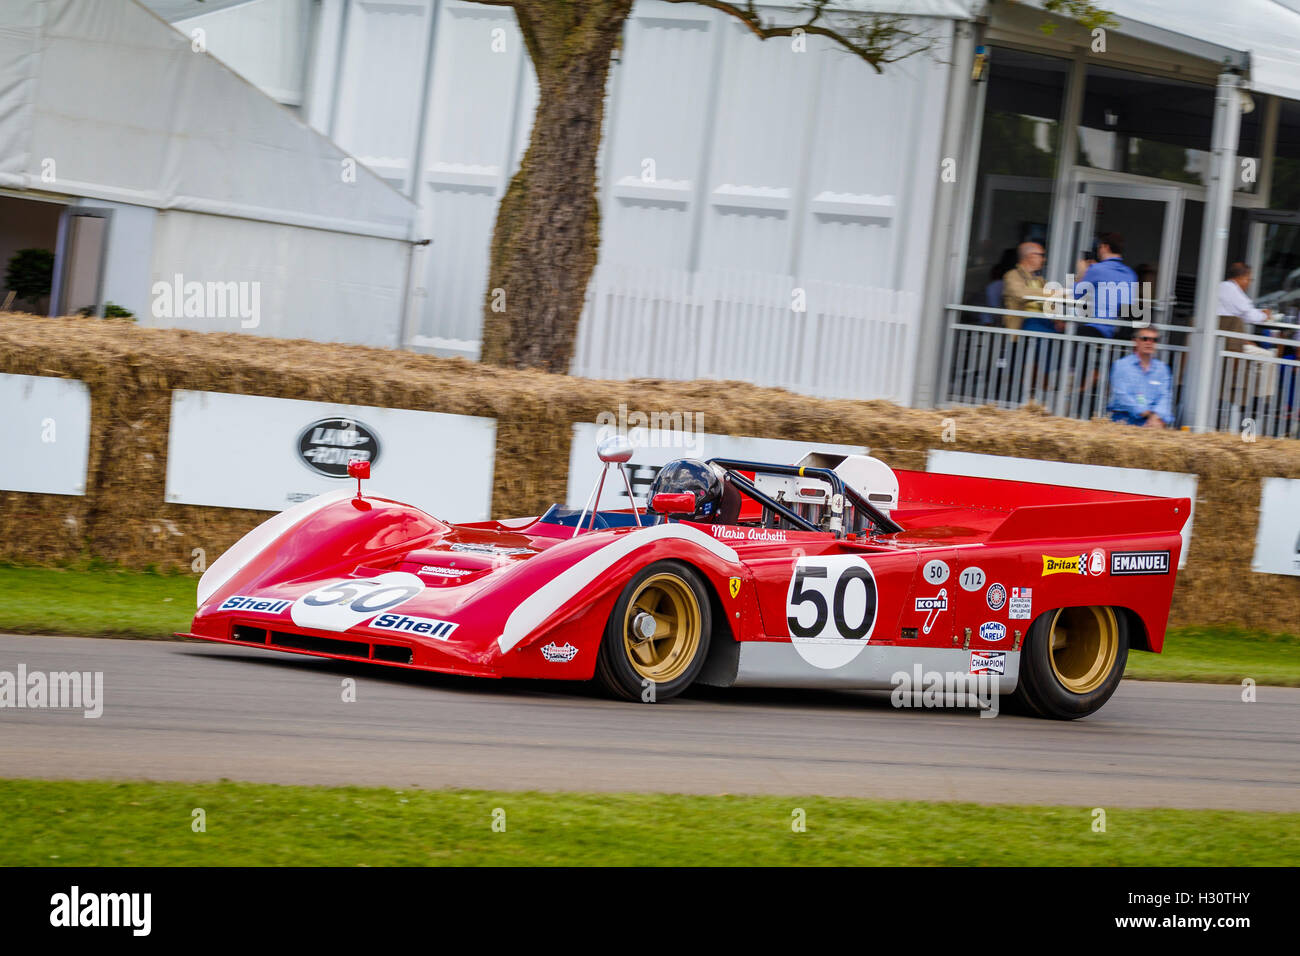 1971 Ferrari 712 Can-Am with driver Paul Knapfield at the 2016 Goodwood Festival of Speed, Sussex, UK. Stock Photo